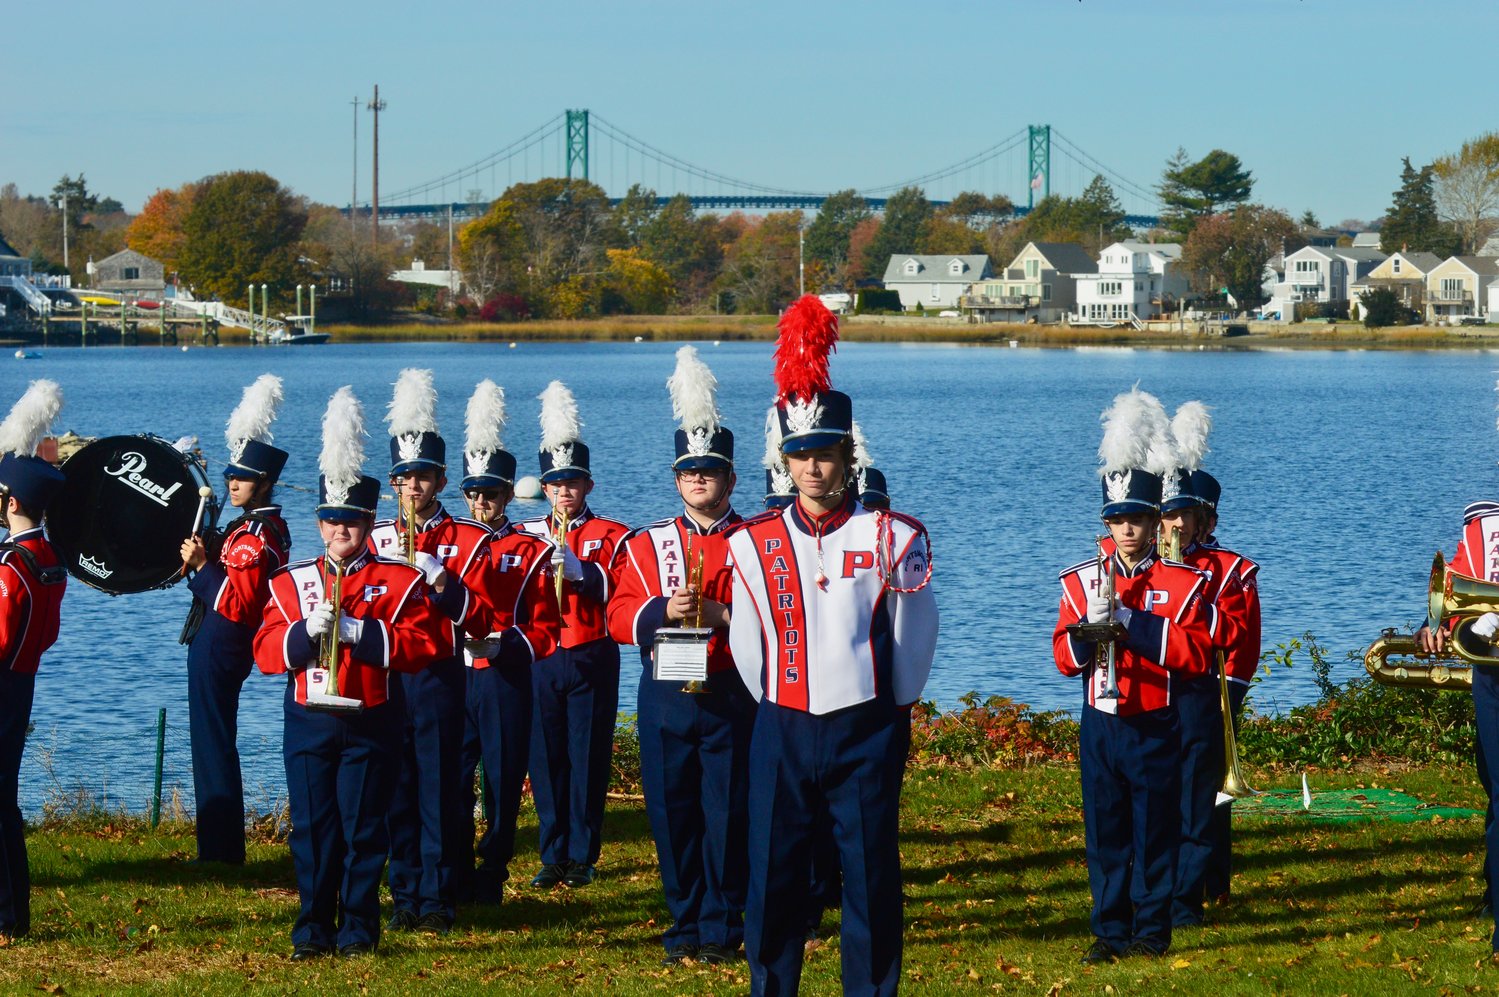 The PHS Marching Band performs on the back lawn of Thriving Tree Coffee House, overlooking Blue Bill Cove, in a tribute to veterans.